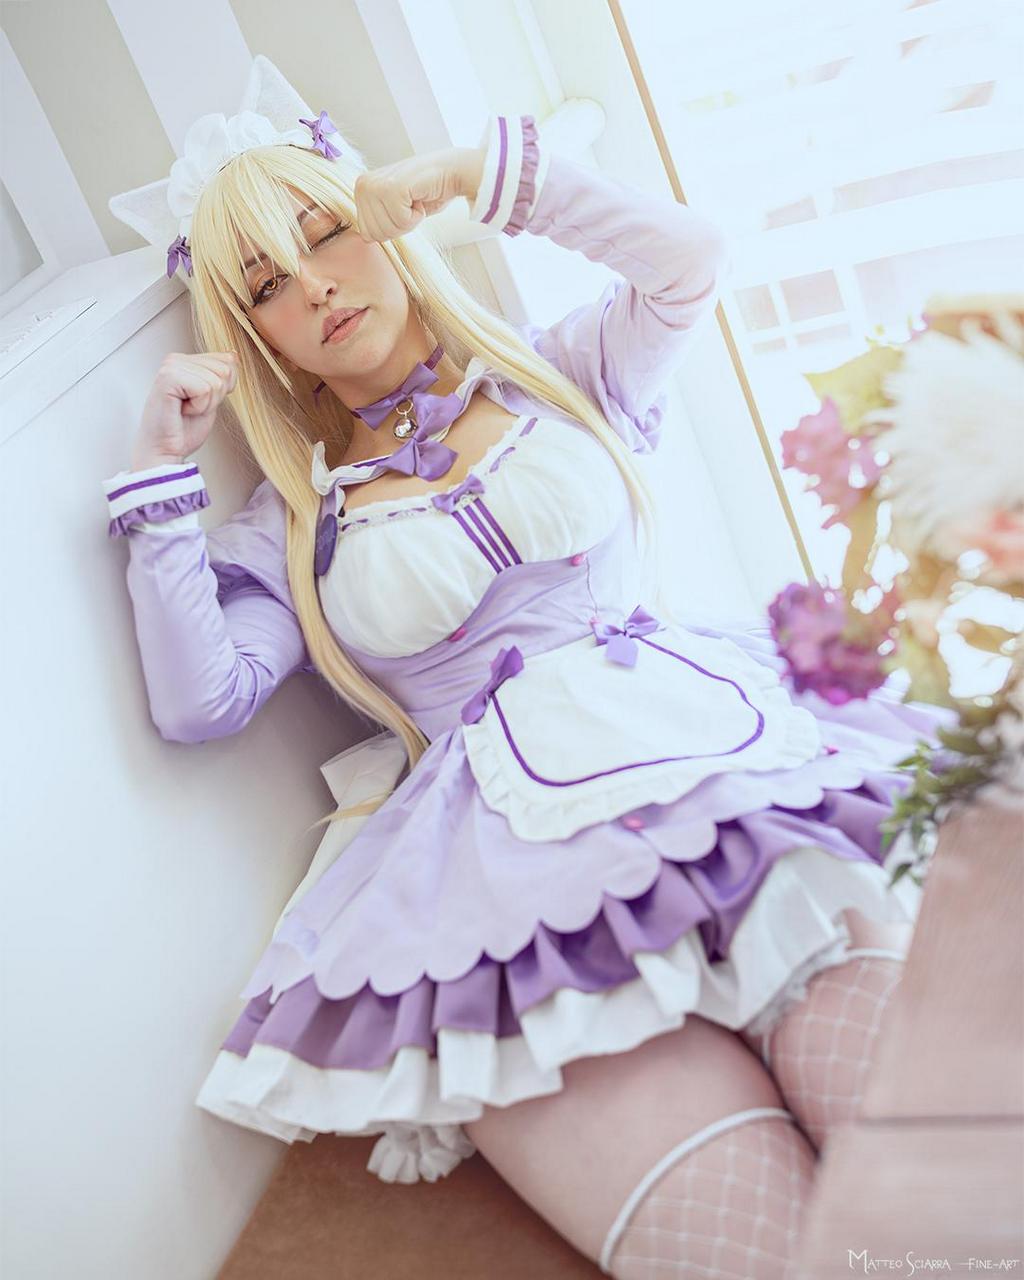 Coconut From Nekopara Cosplay By M